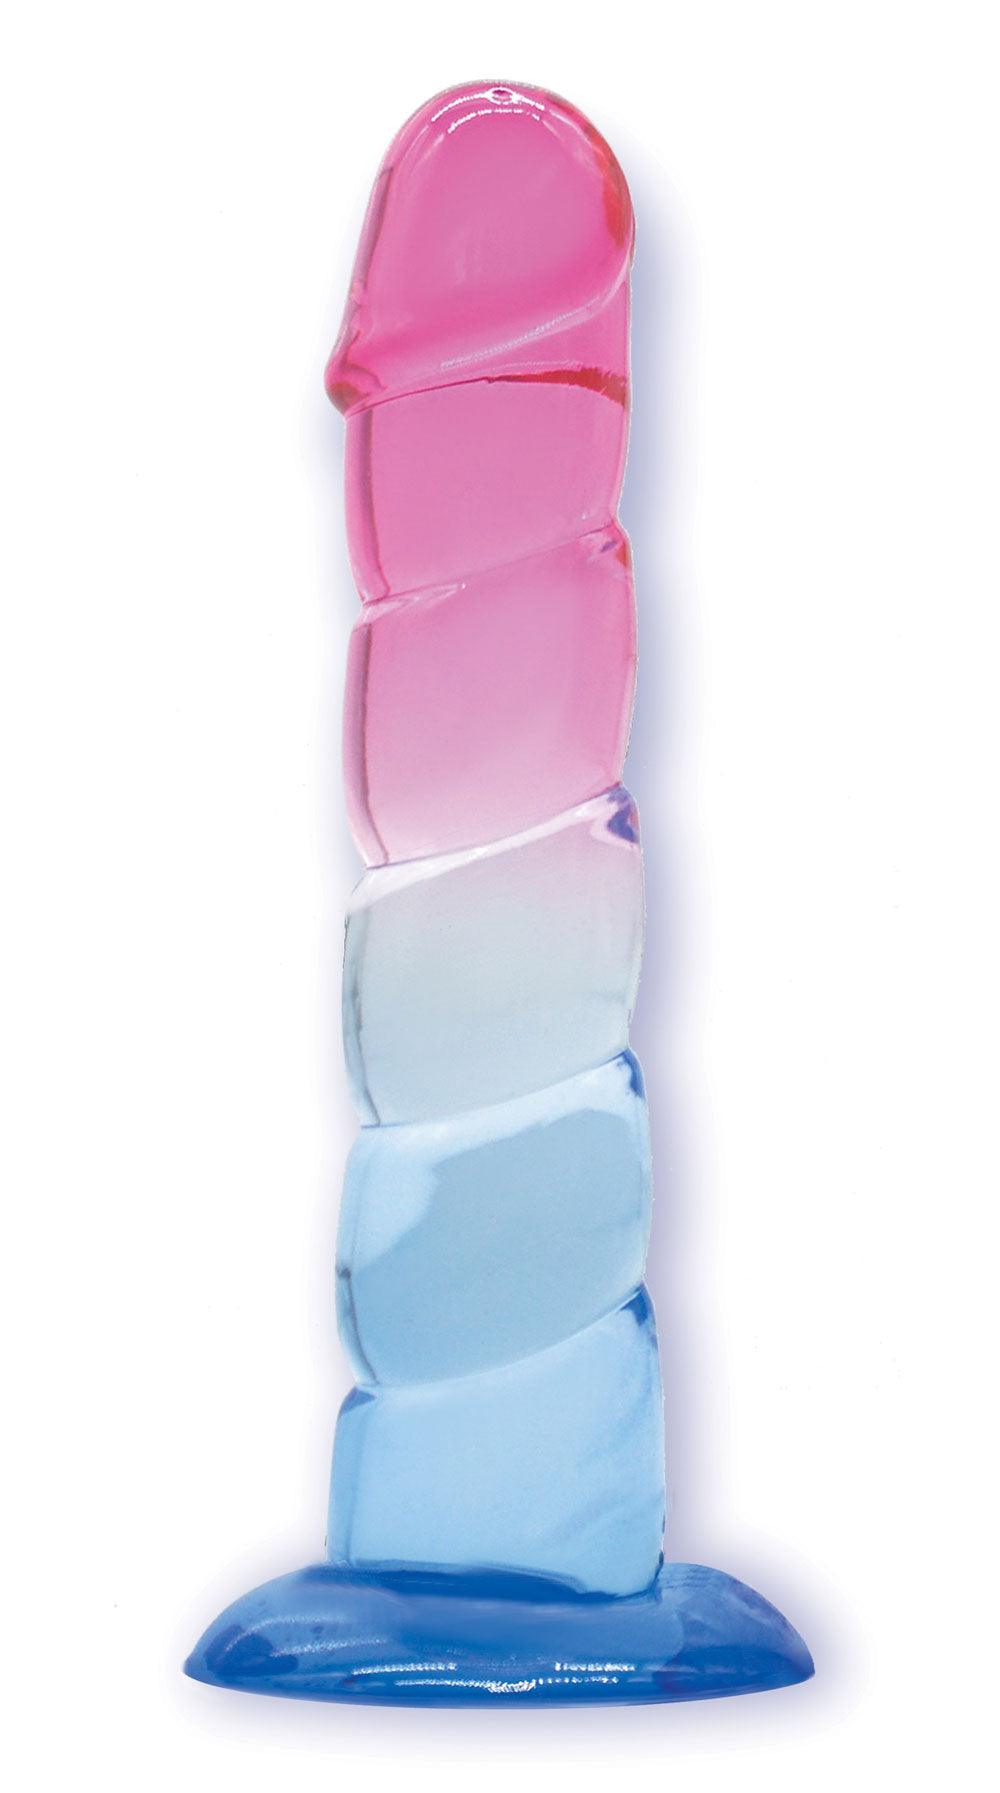 Shades, 7.5" Swirl Jelly Tpr Gradient Dong - Pink and Blue - My Sex Toy Hub